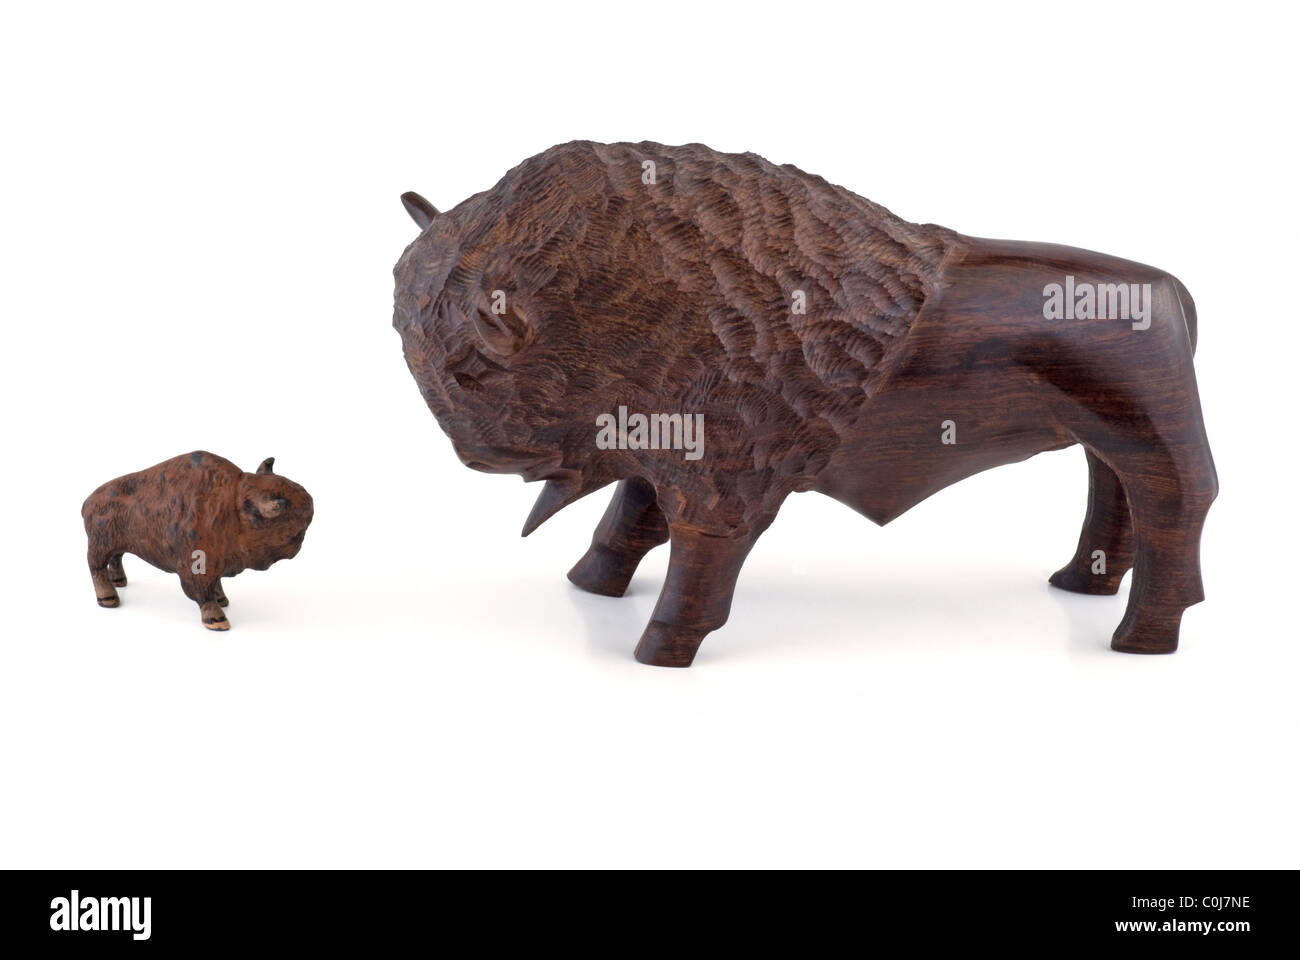 Two bulls ready to charge each other. Small versus large. Small large comparison. Stock Photo